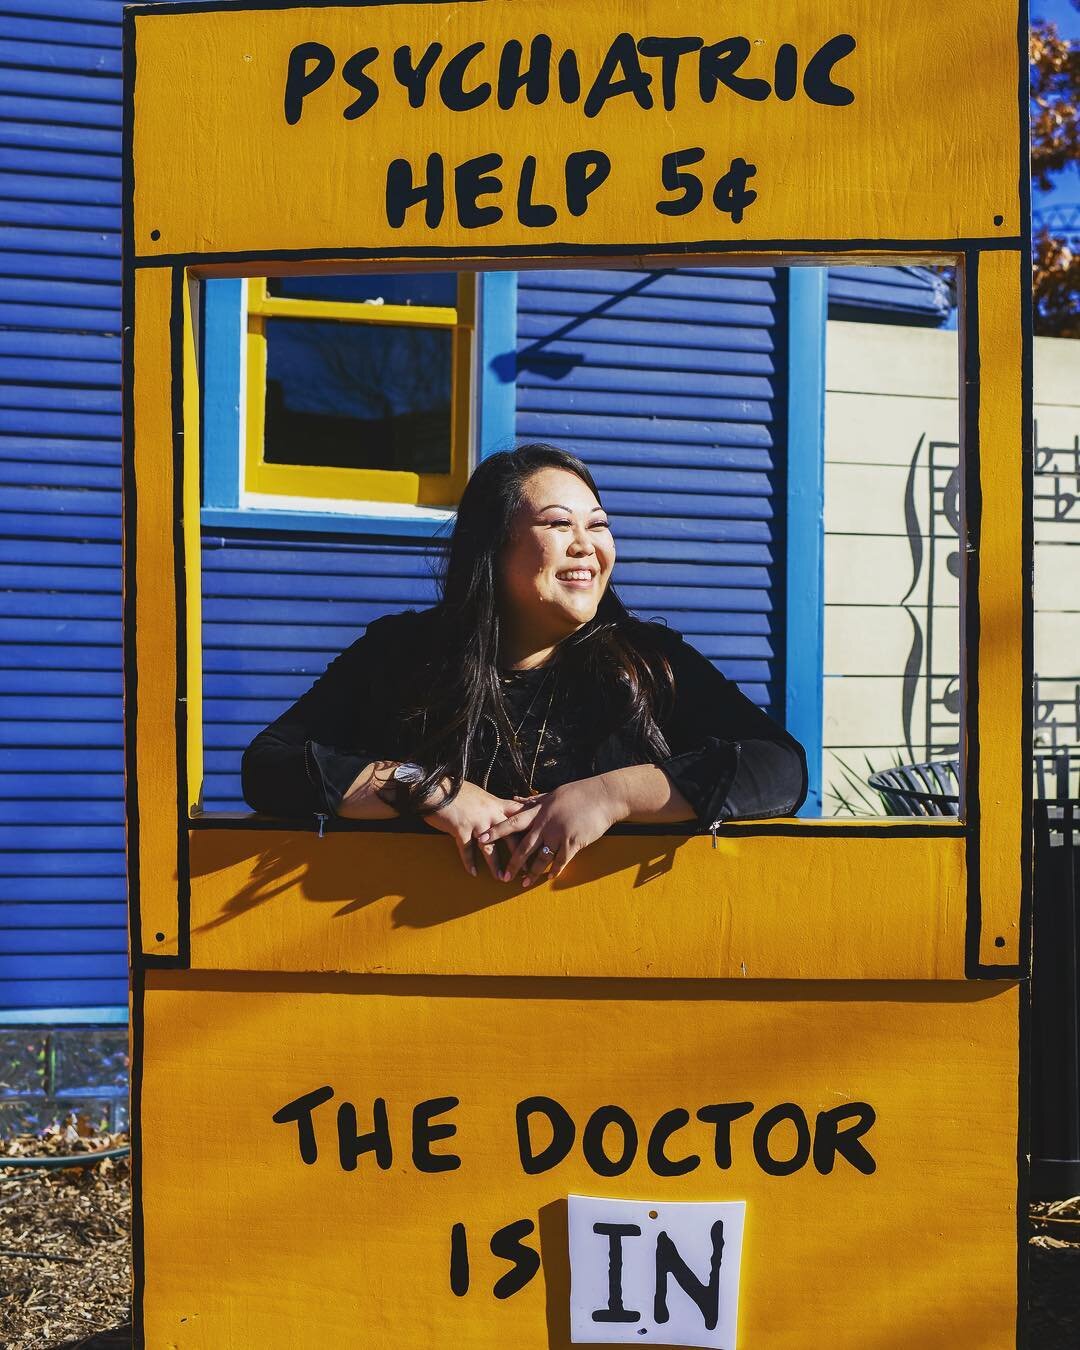 I&rsquo;m no doctor, but I&rsquo;m here to help! Find me in Dallas, near Bishop Arts at Lifeologie Oak Cliff. I&rsquo;m a family therapist who can see the whole family! I see anyone and everyone from ages 5 to 65+ and I specialize in trauma. Help is 